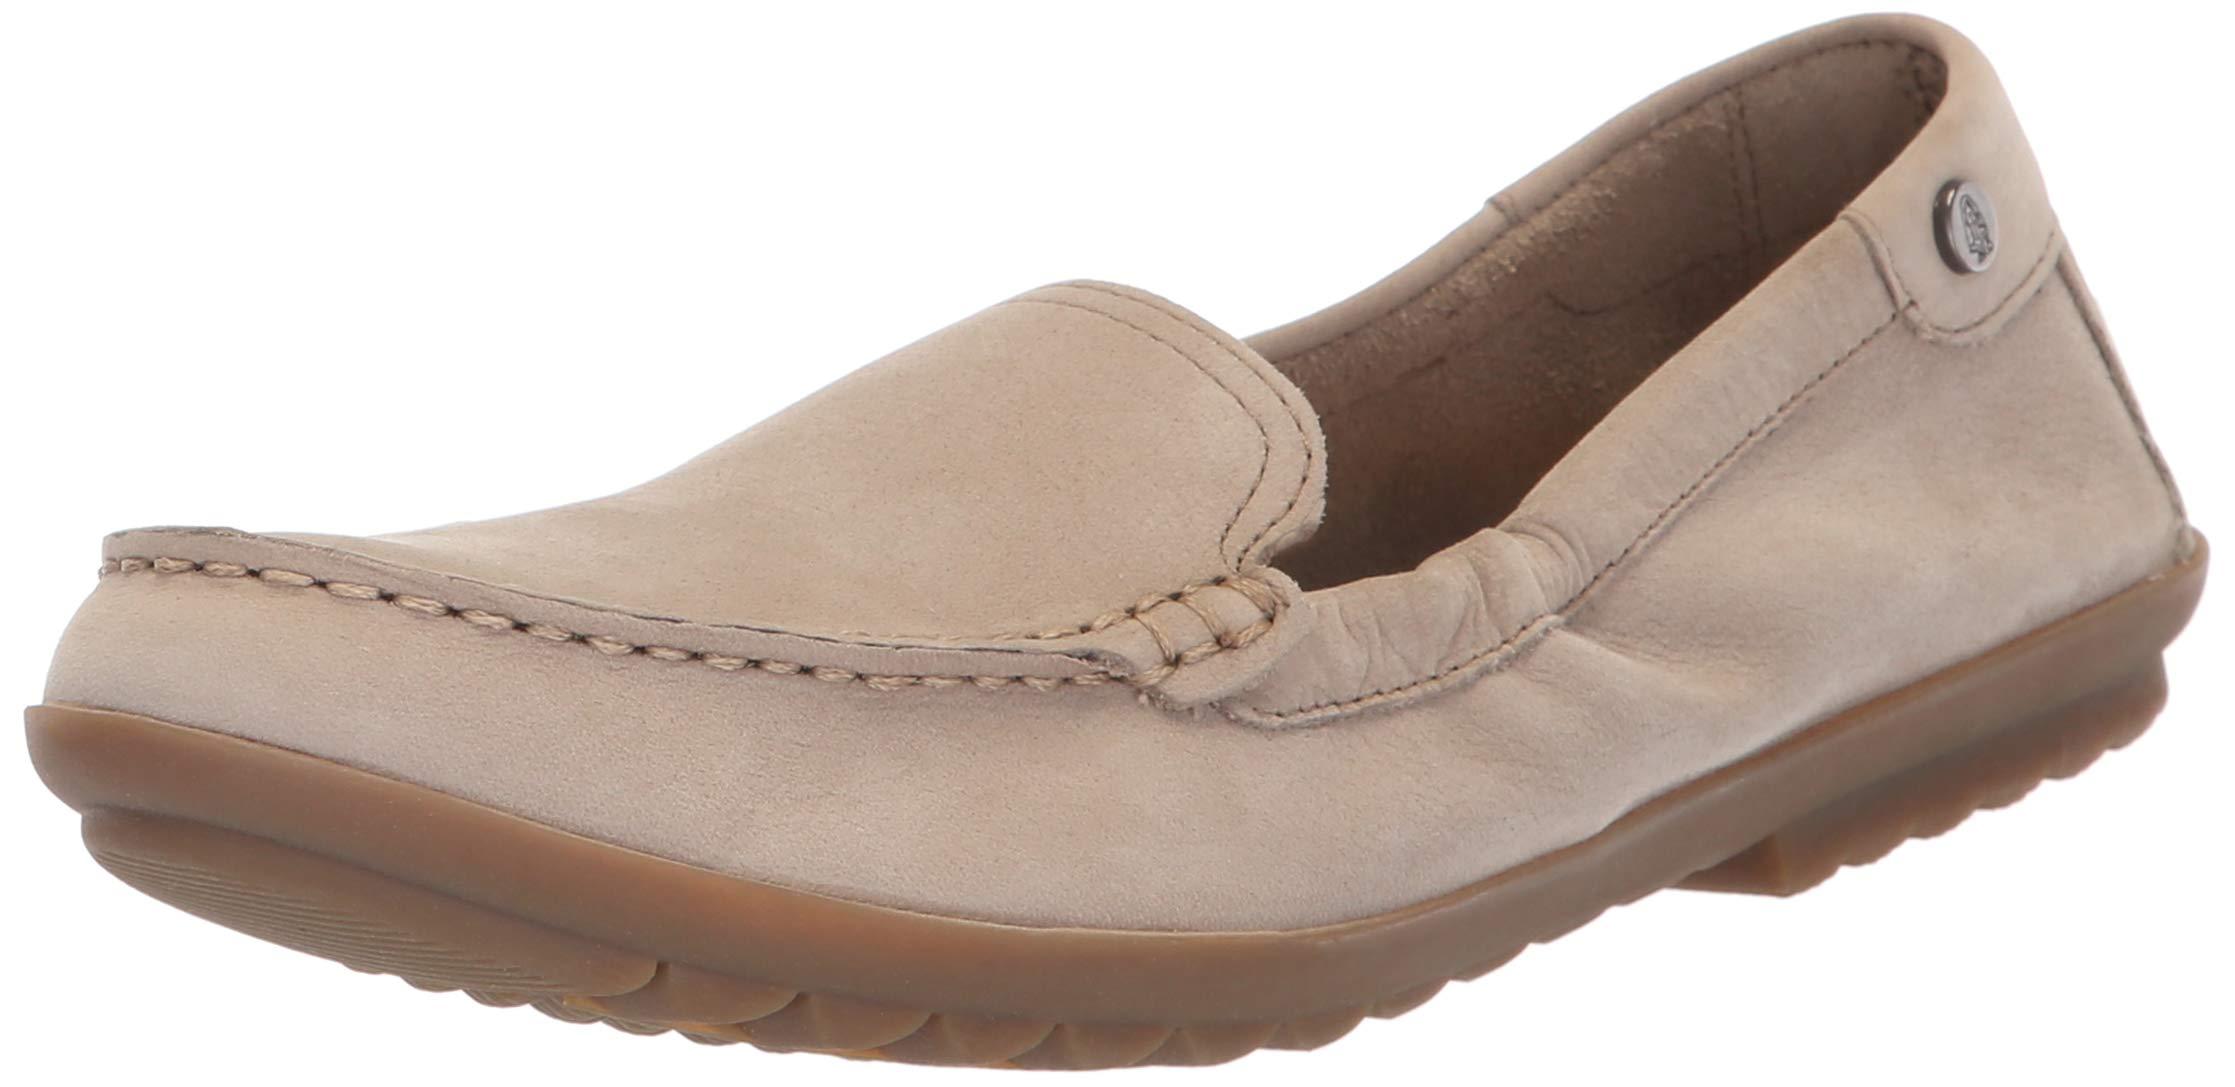 Hush Puppies Loafers Online Factory, Save 43% | jlcatj.gob.mx